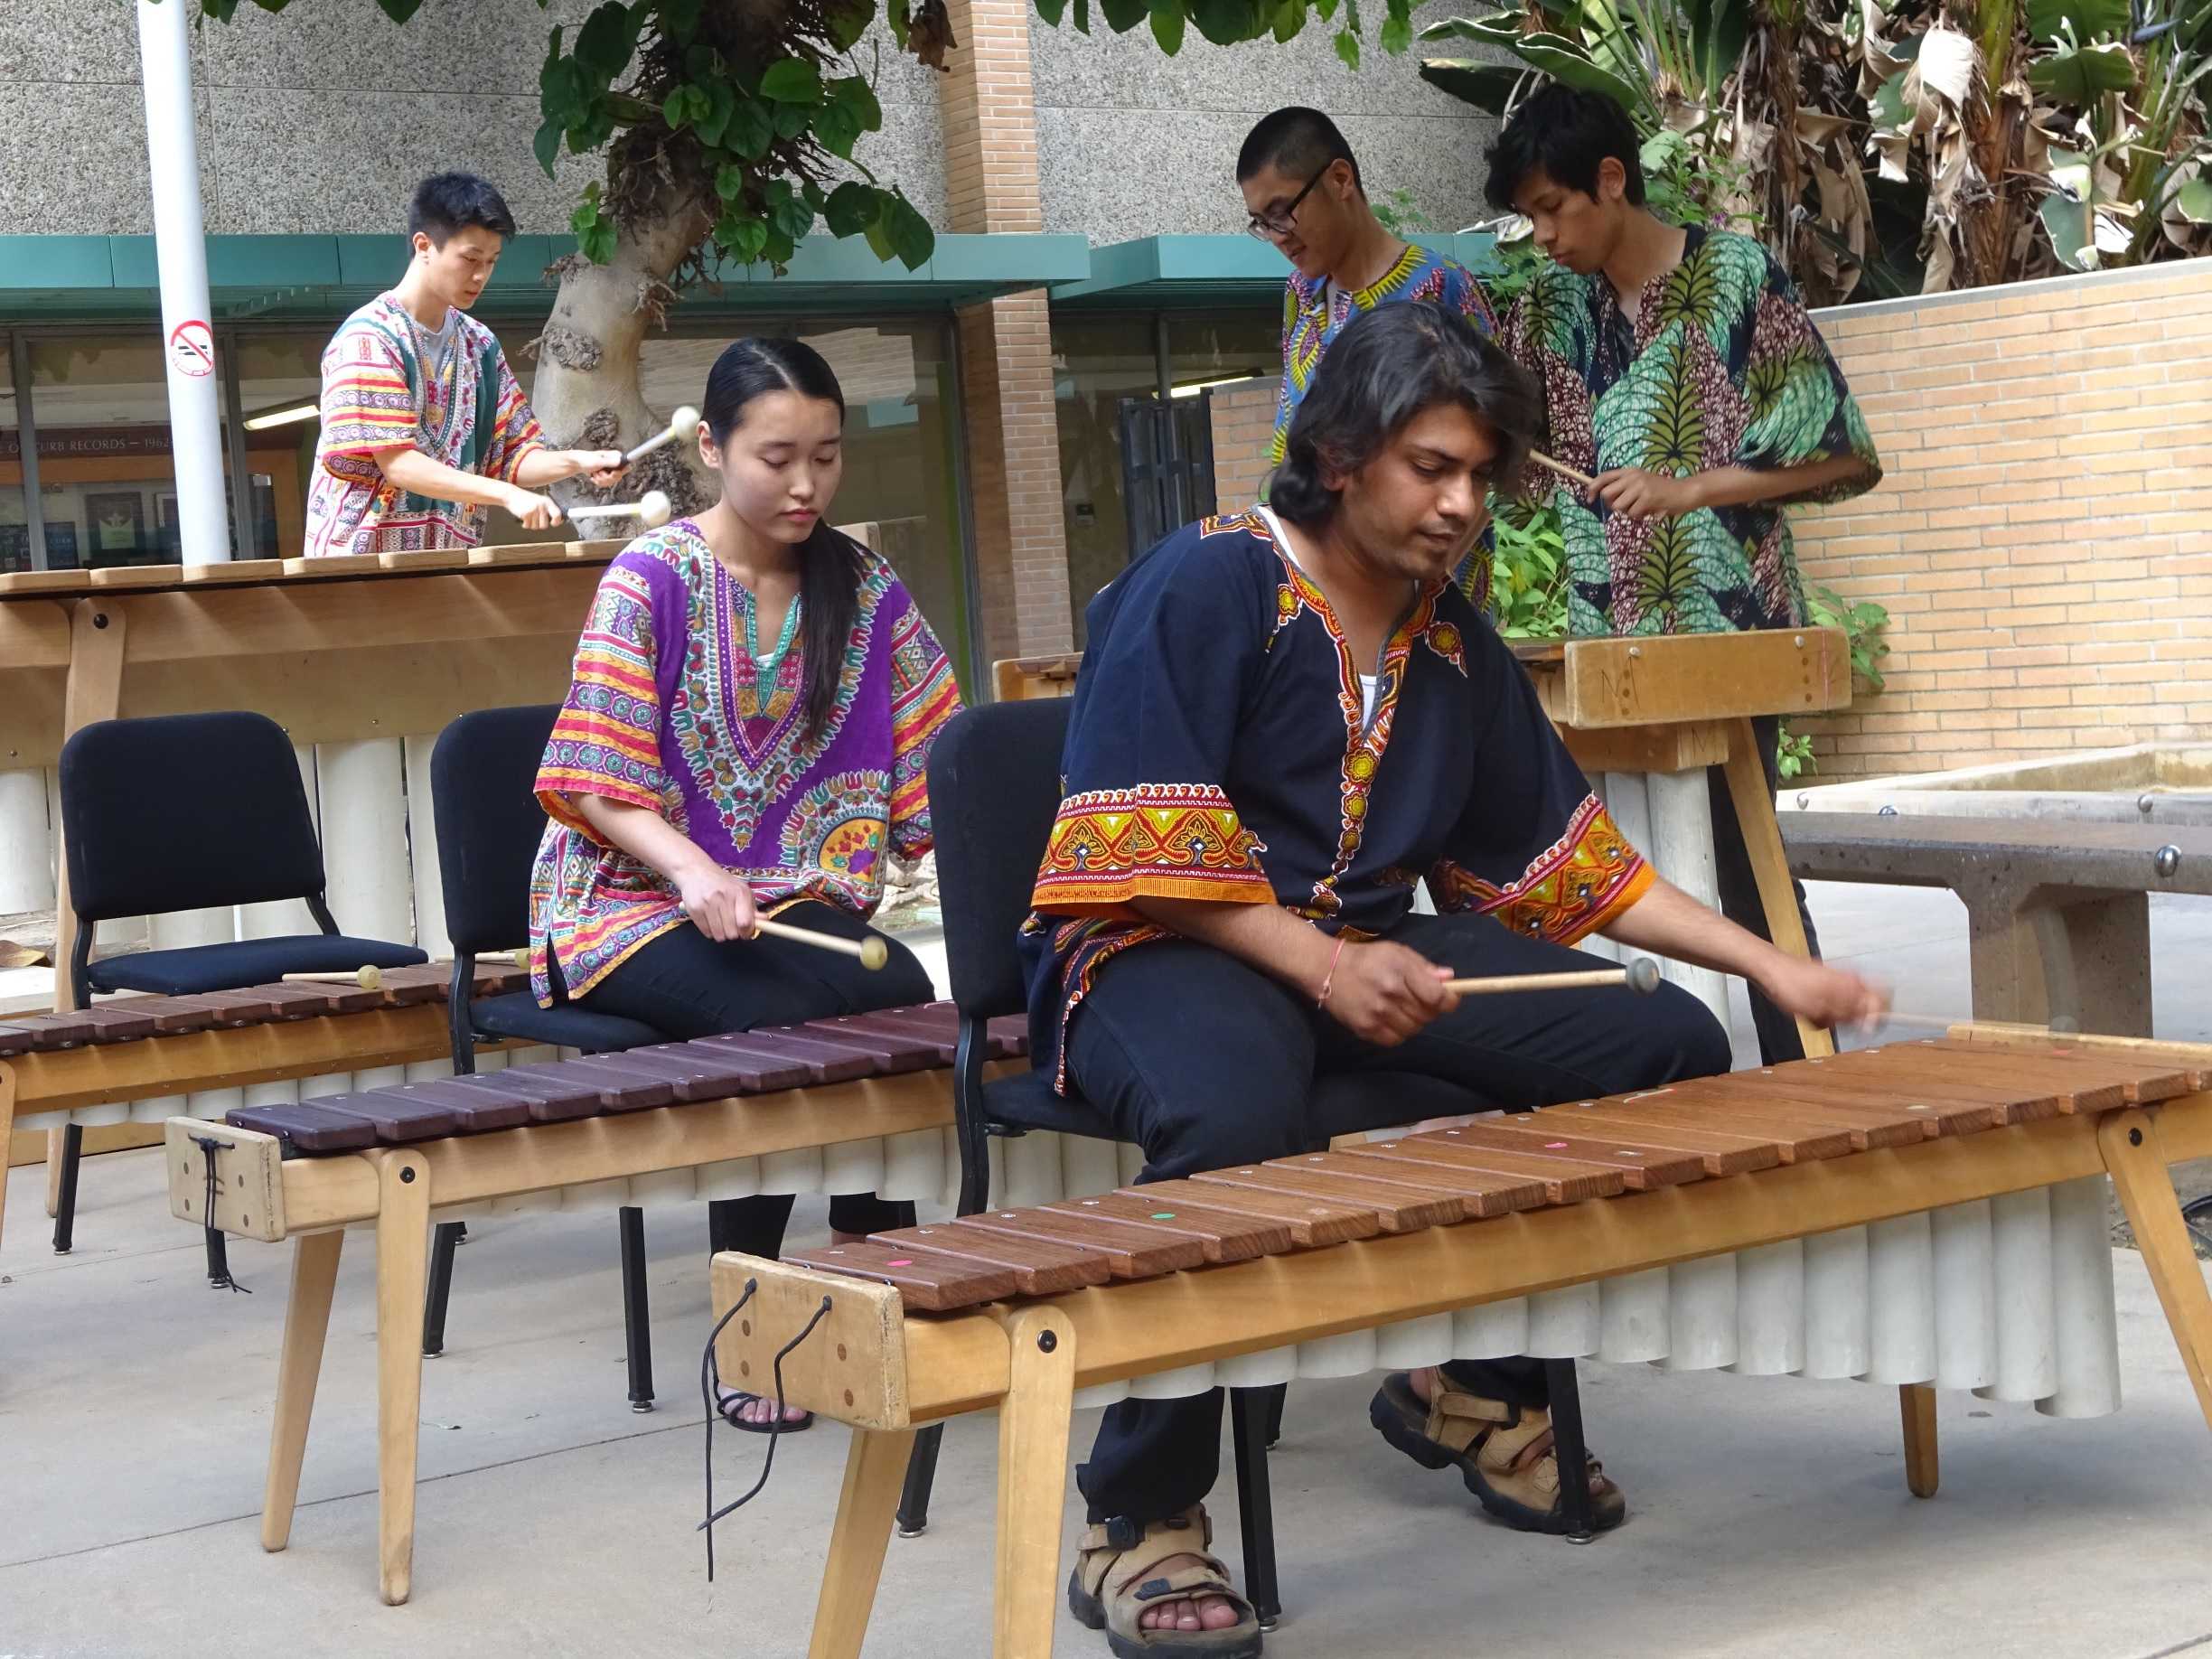 Several+students+pictured+playing+marimbas